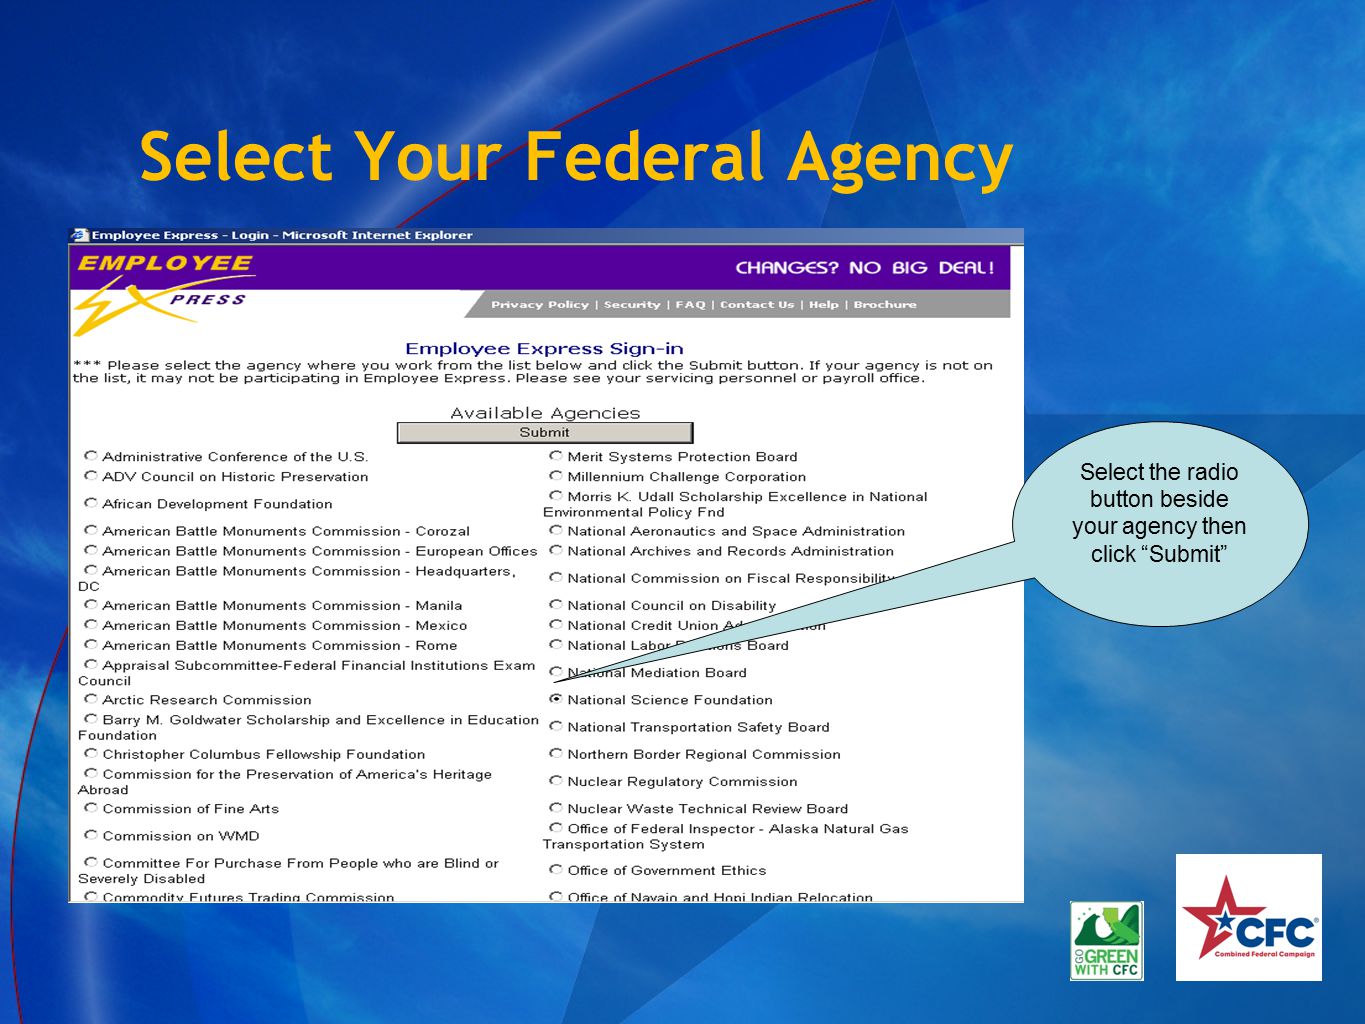 Select Your Federal Agency Select the radio button beside your agency then click Submit